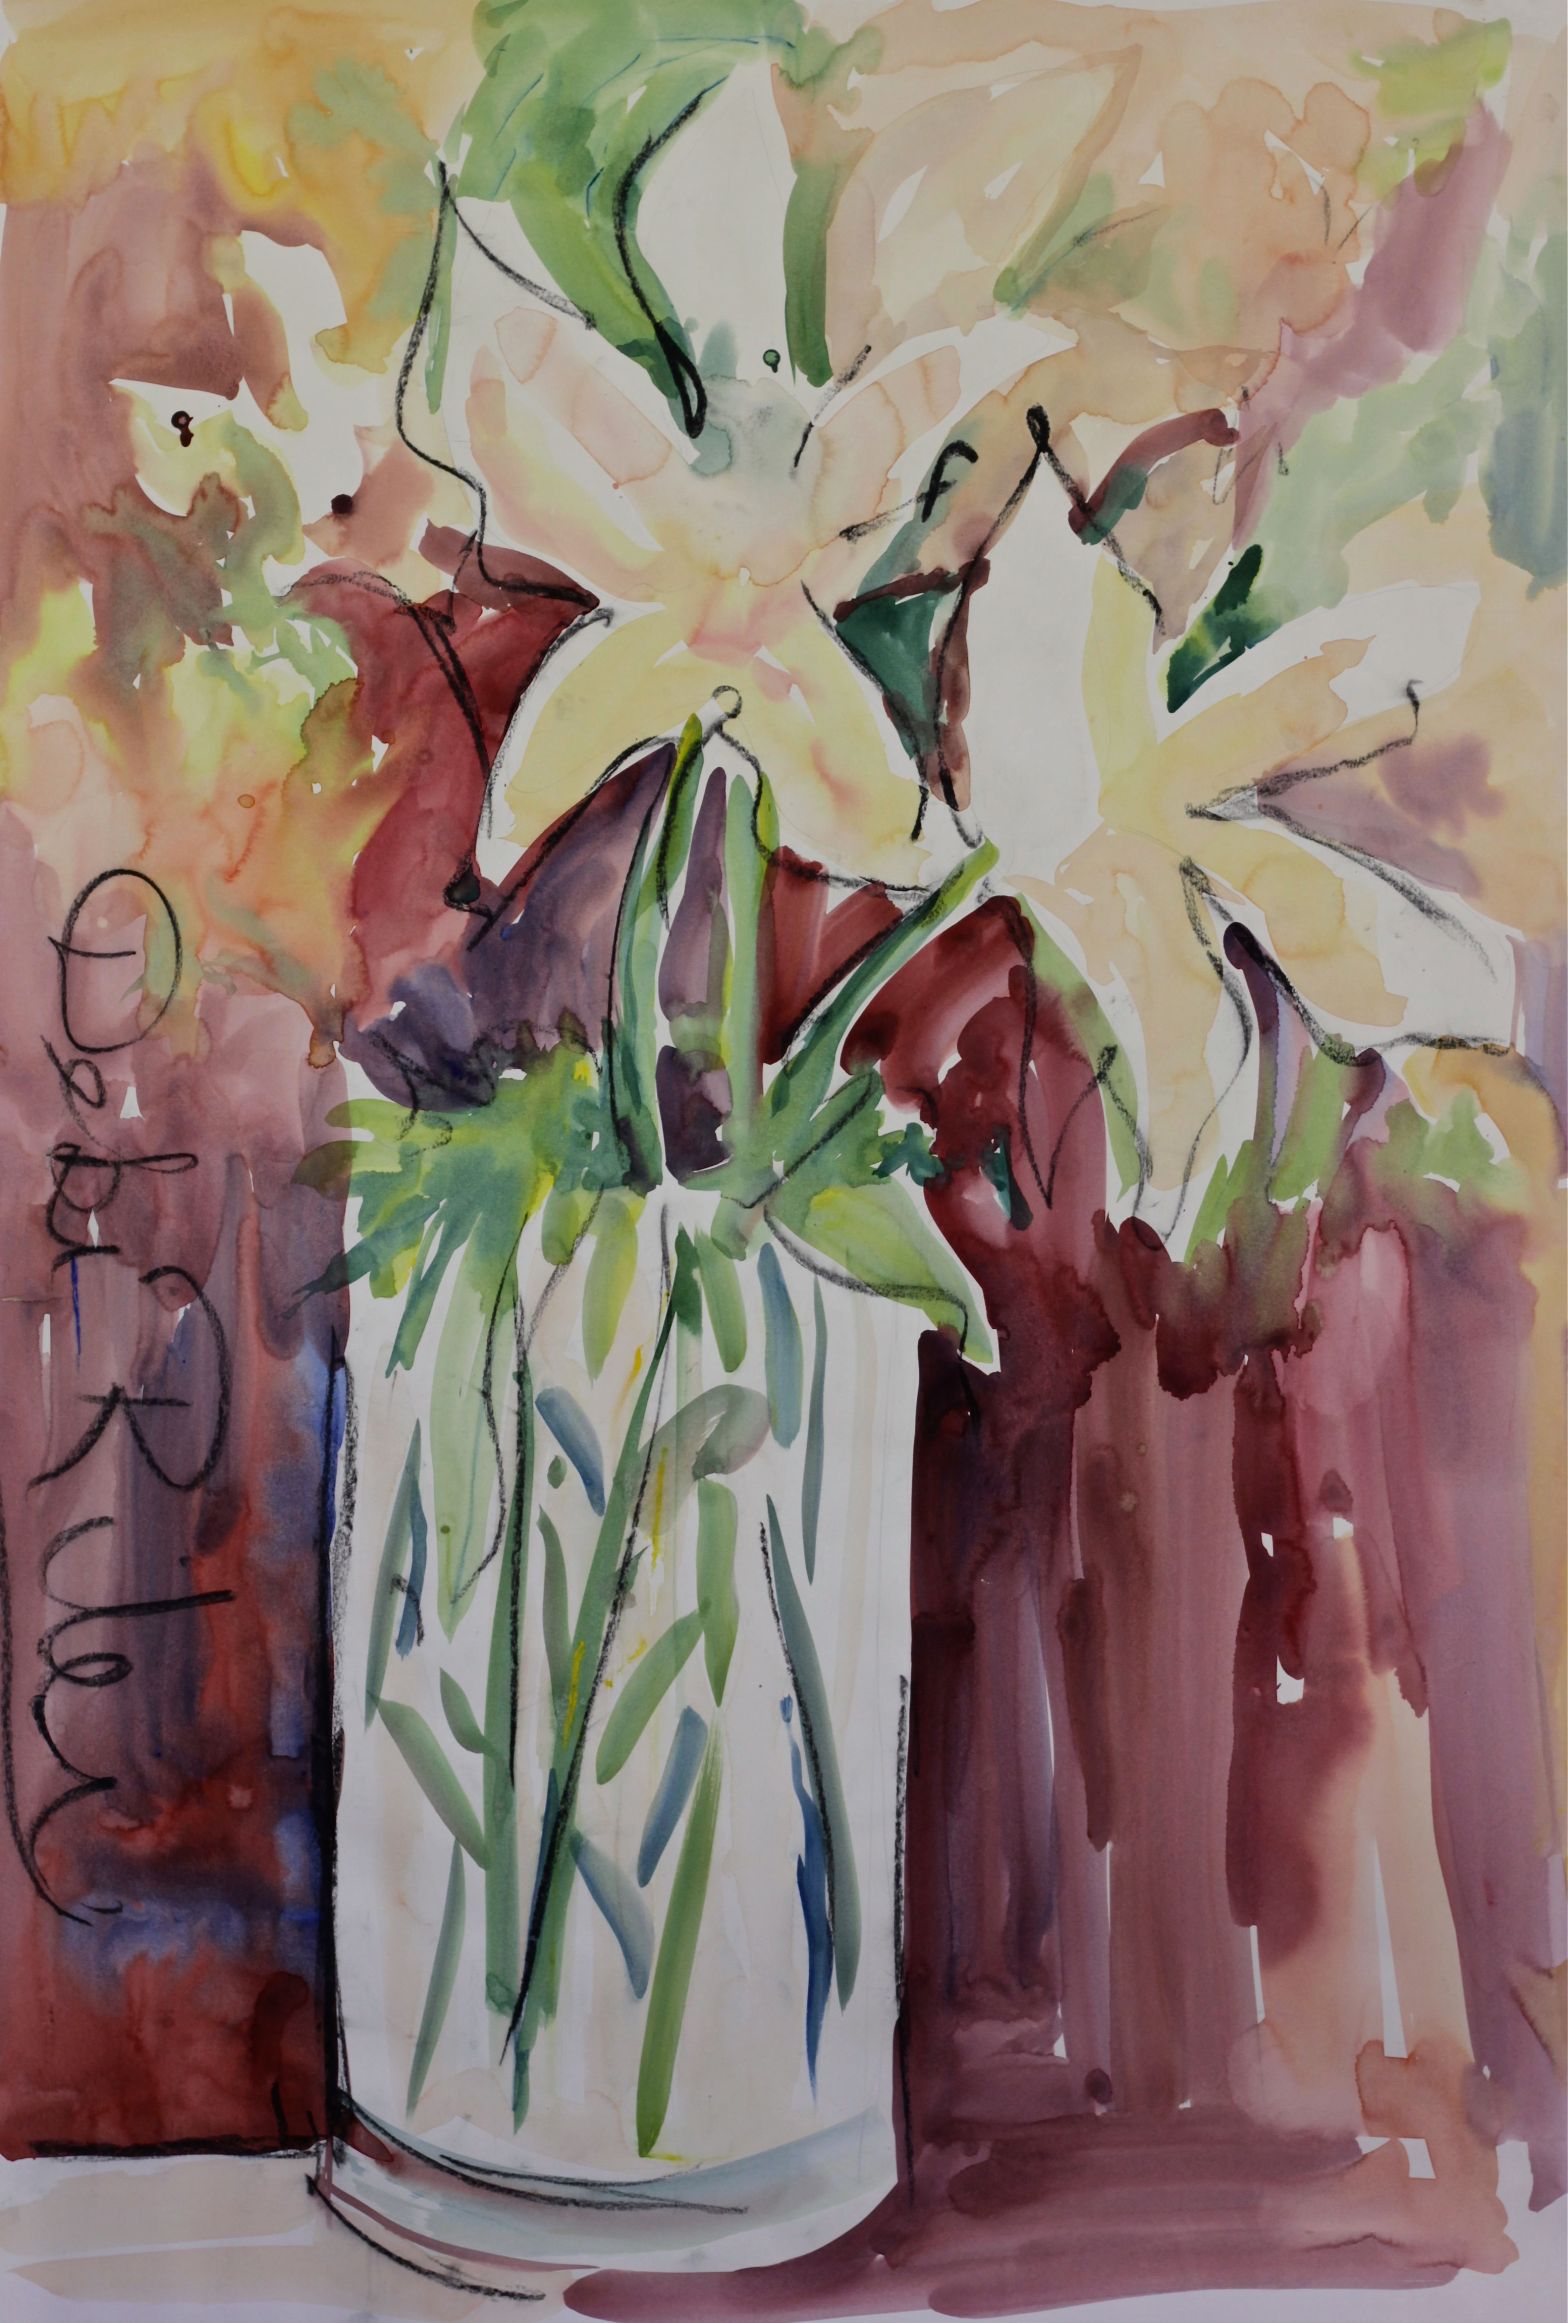 watercolor lilies, abstract flowers, Watercolours Wild Floral fast and loose painting debiriley.com